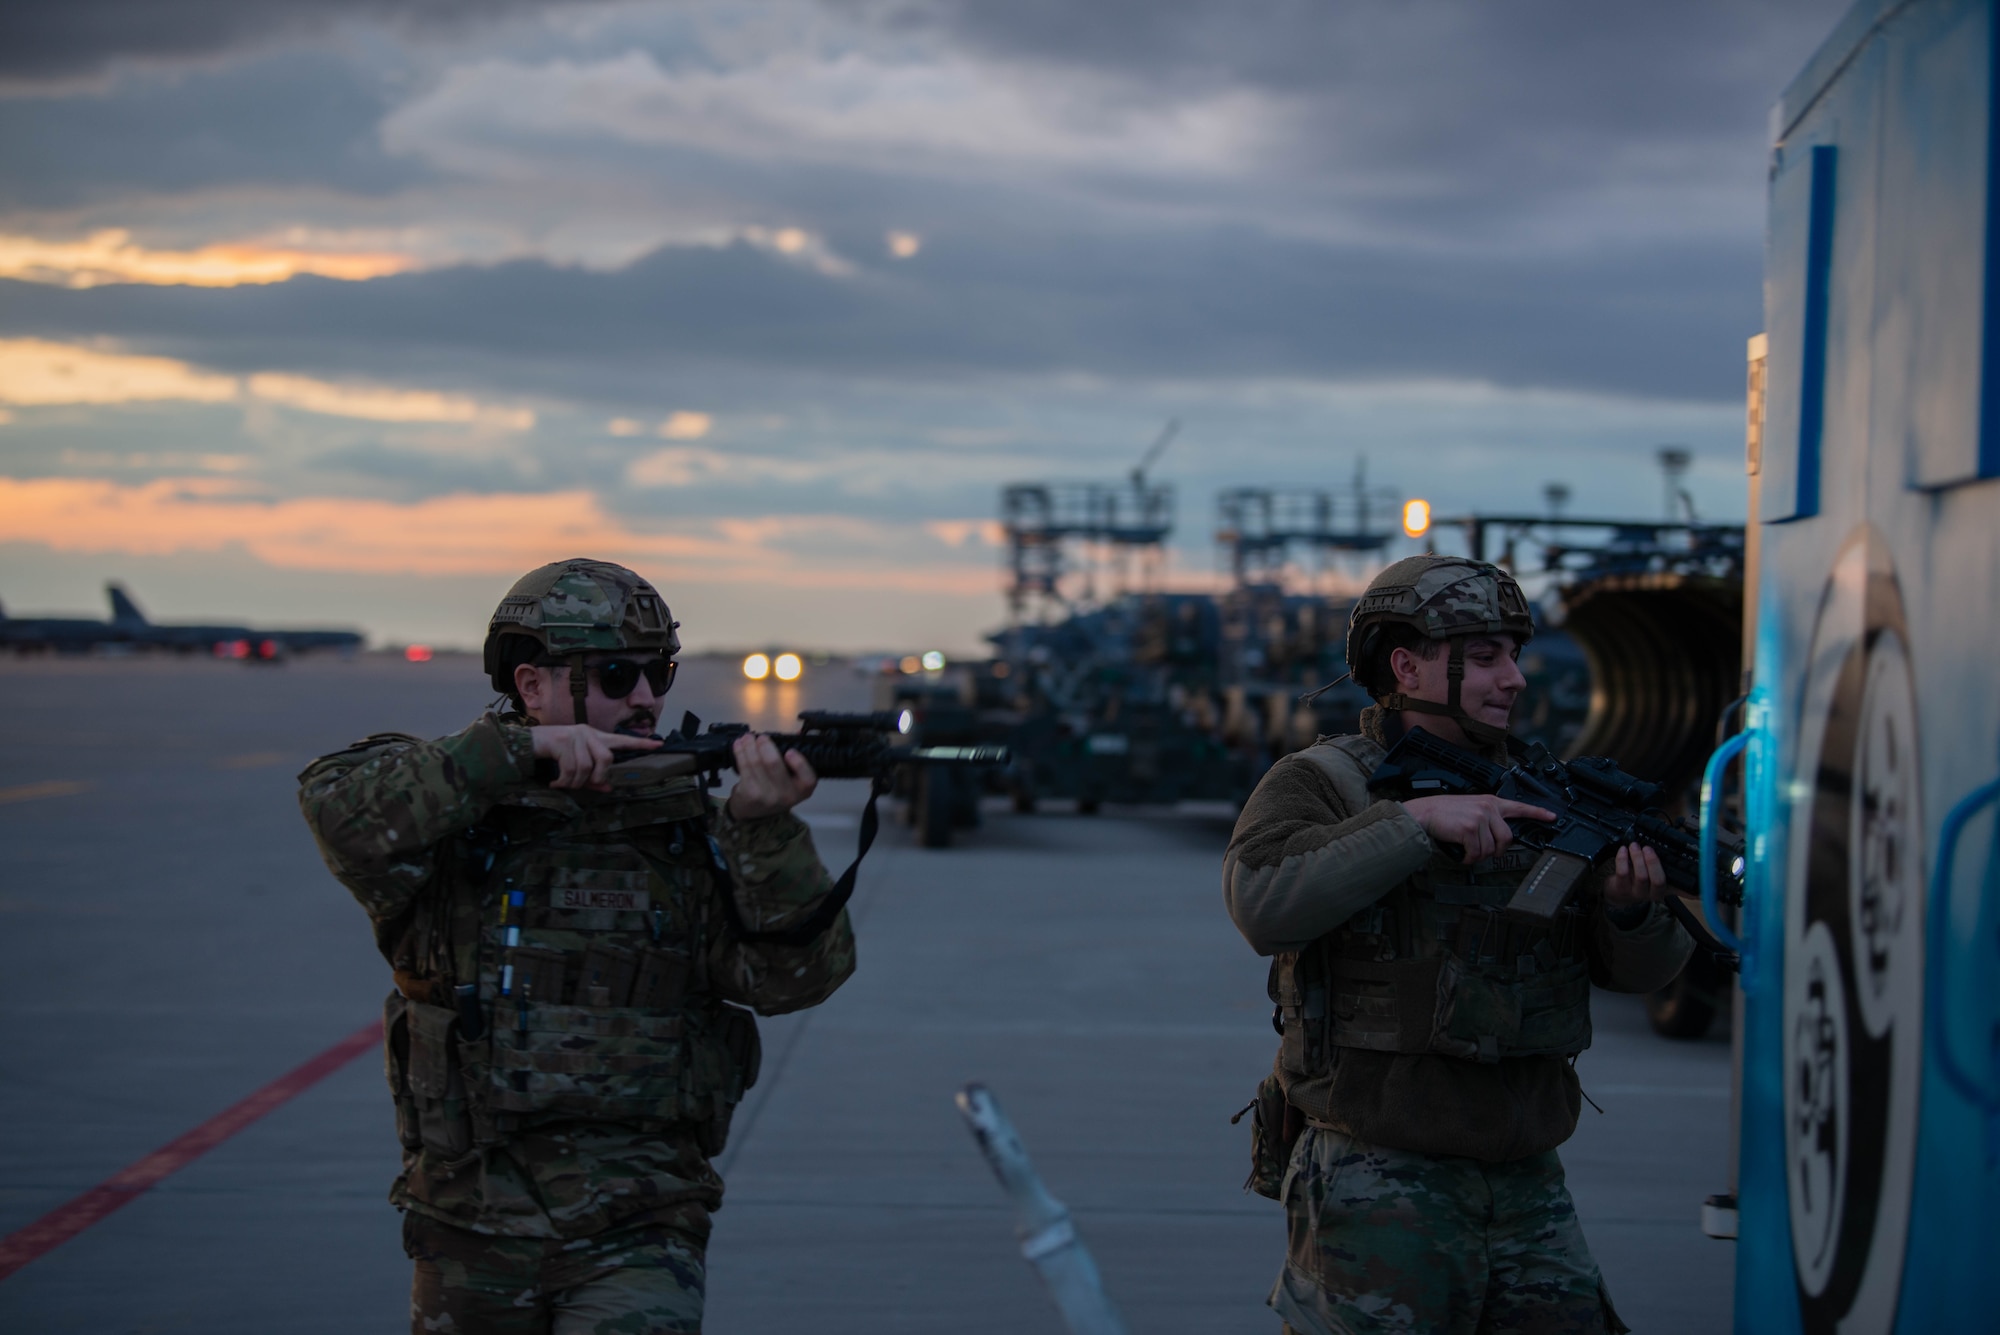 Airman Jonathan Salmeron, 5th Security Forces Squadron defender, (left) and Senior Airman Jose Soiza, 5th Security Forces Squadron defender, complete a security inspection on the flightline in support of Exercise Prairie Vigilance/Bayou Vigilance 24-3 at Minot Air Force Base, North Dakota, April 8, 2024. Exercises like this continually develop Airmen and aircrew skill sets by improving operational capabilities and increasing mission readiness. (U.S. Air Force photo by Airman 1st Class Luis Gomez)